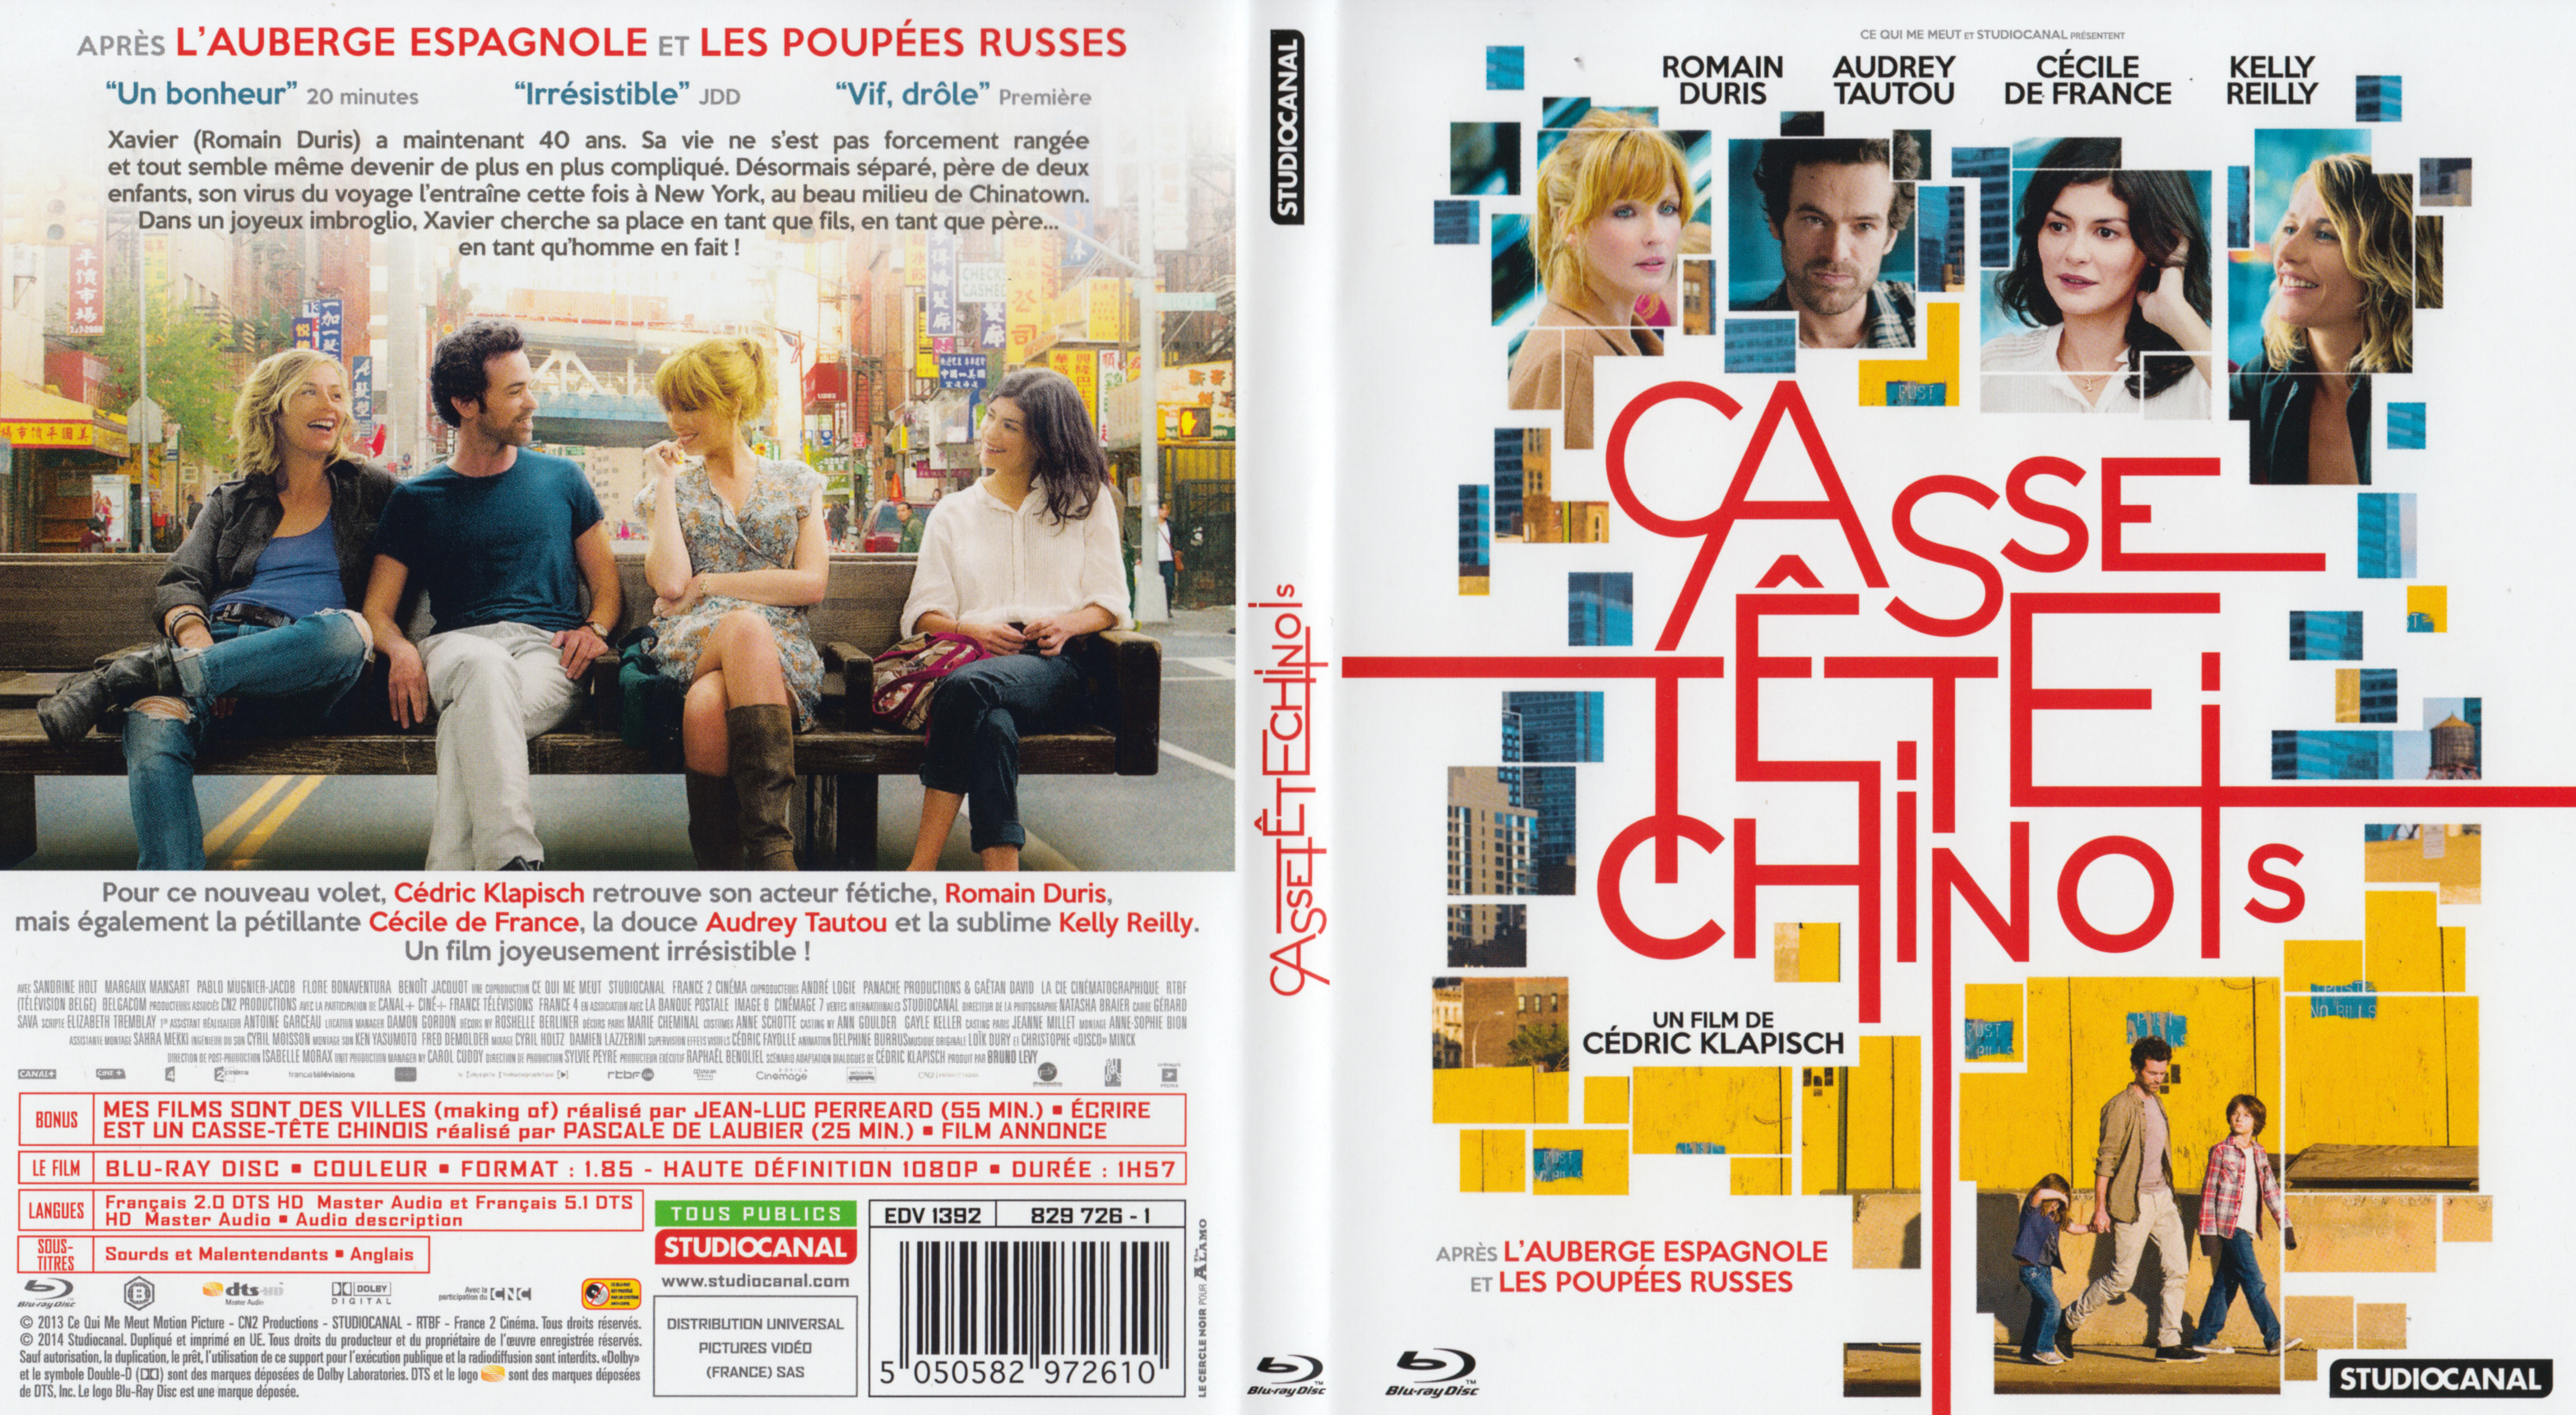 Jaquette DVD Casse-tte chinois (BLU-RAY)